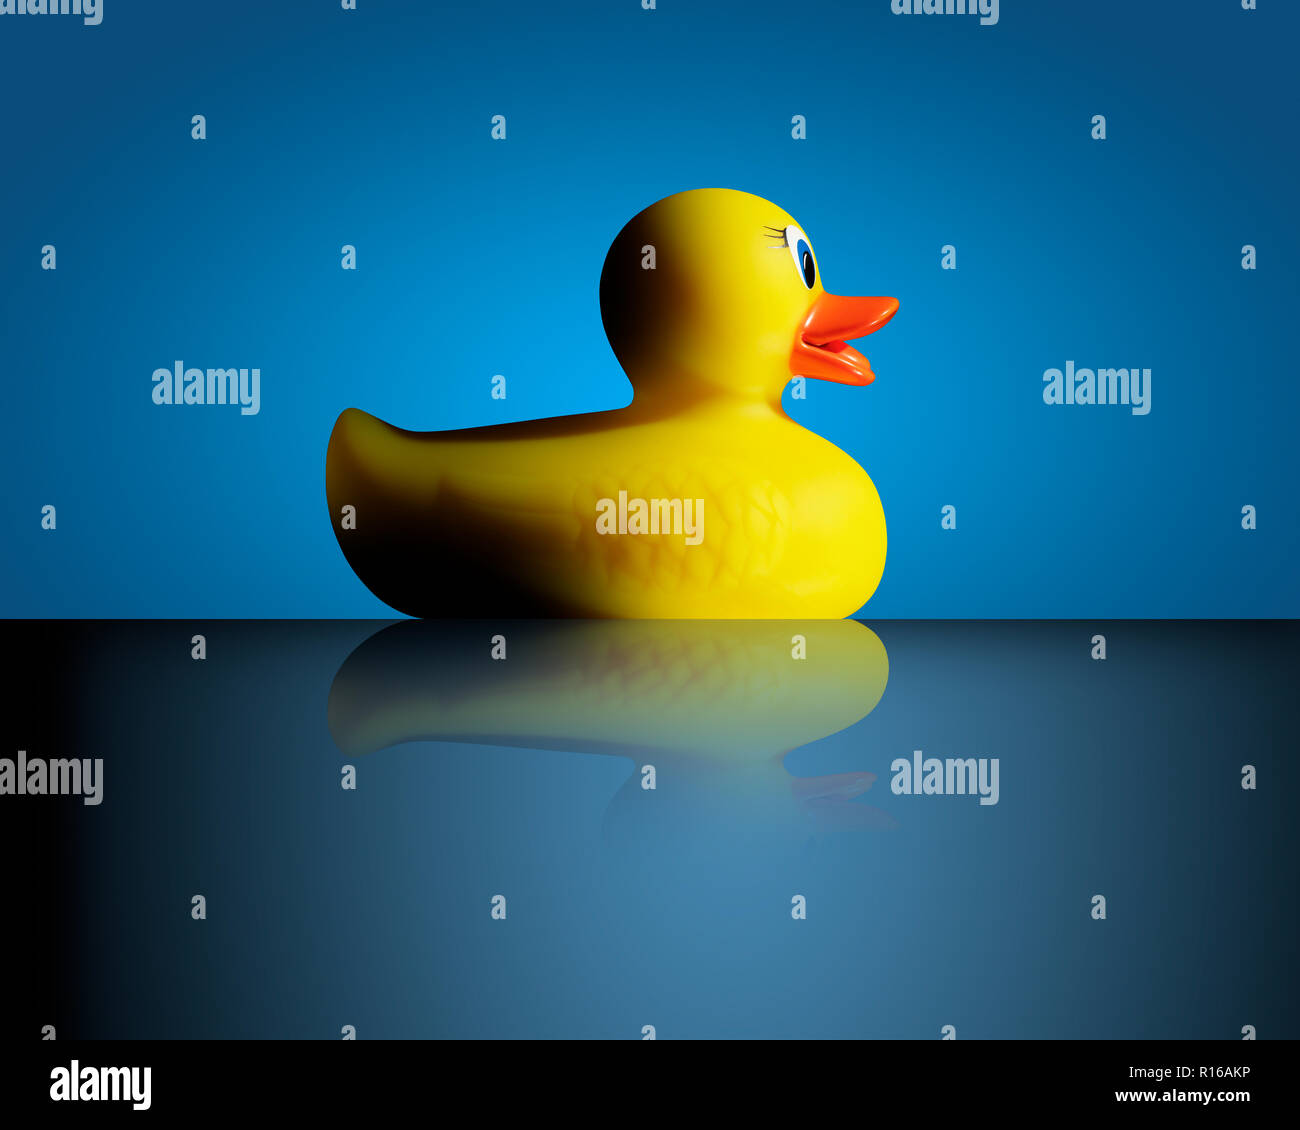 Yellow rubber duck against blue background, side view Stock Photo